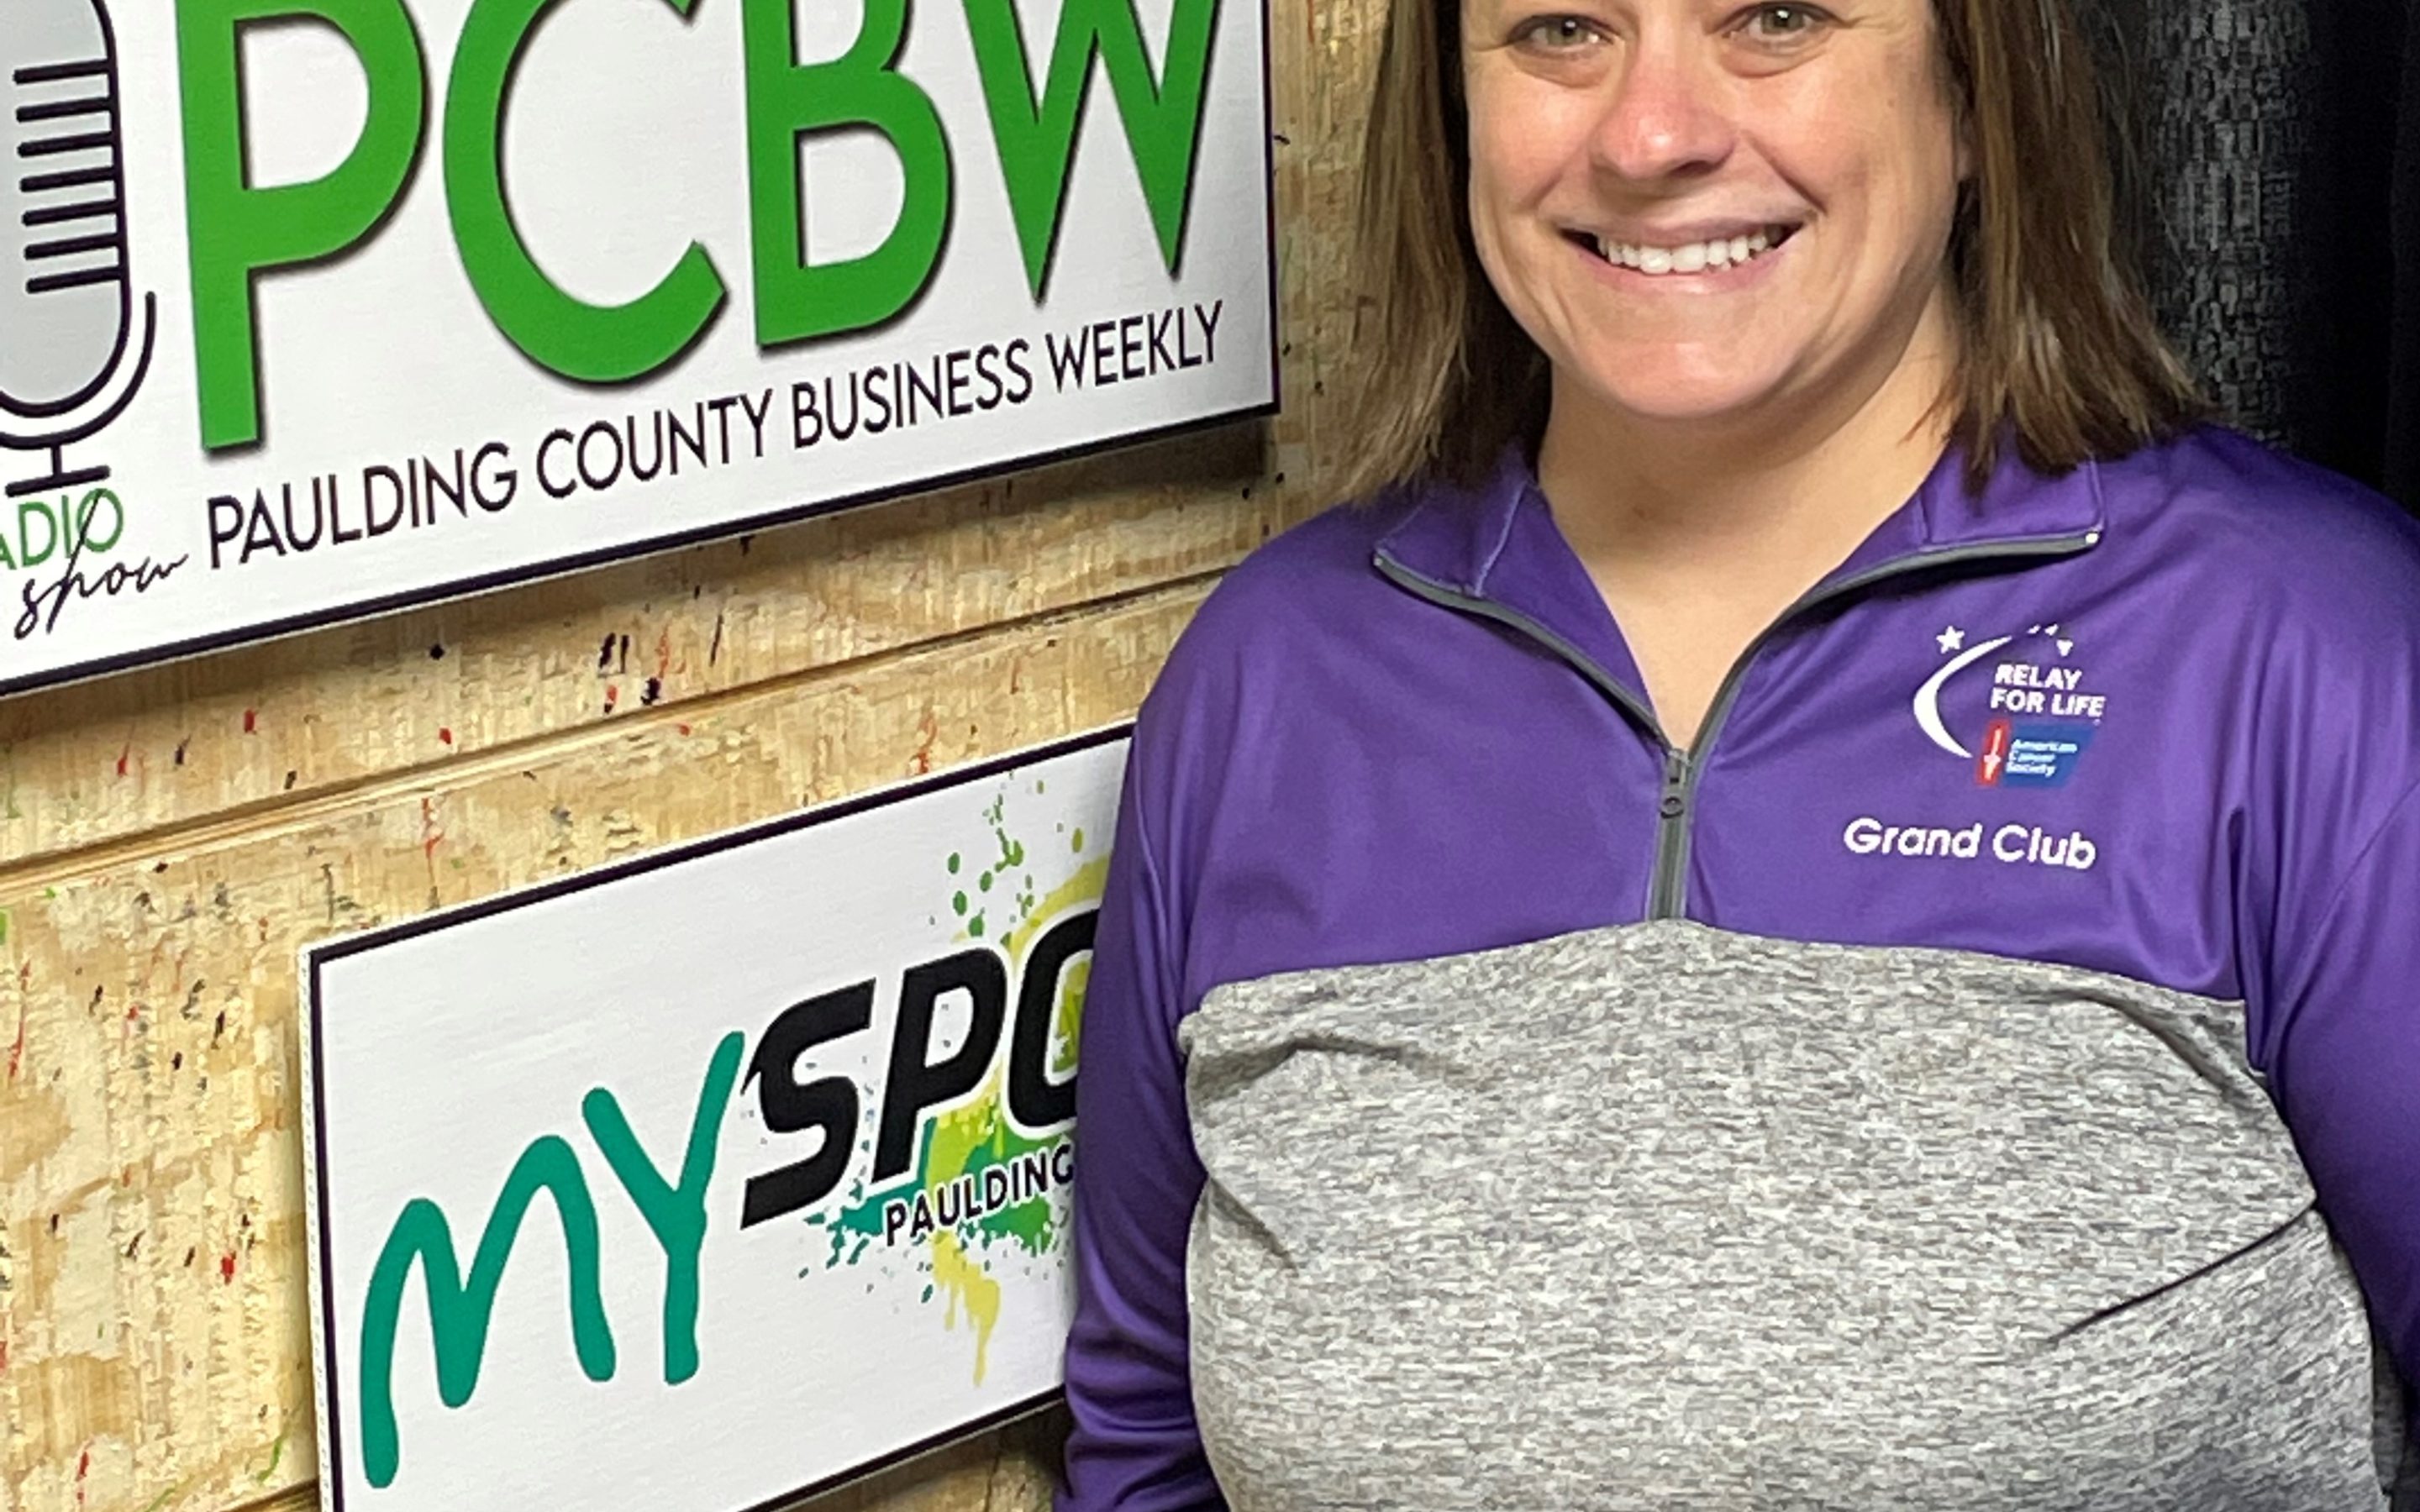 Next guest on Paulding County Business Weekly: Paulding County Relay for Life